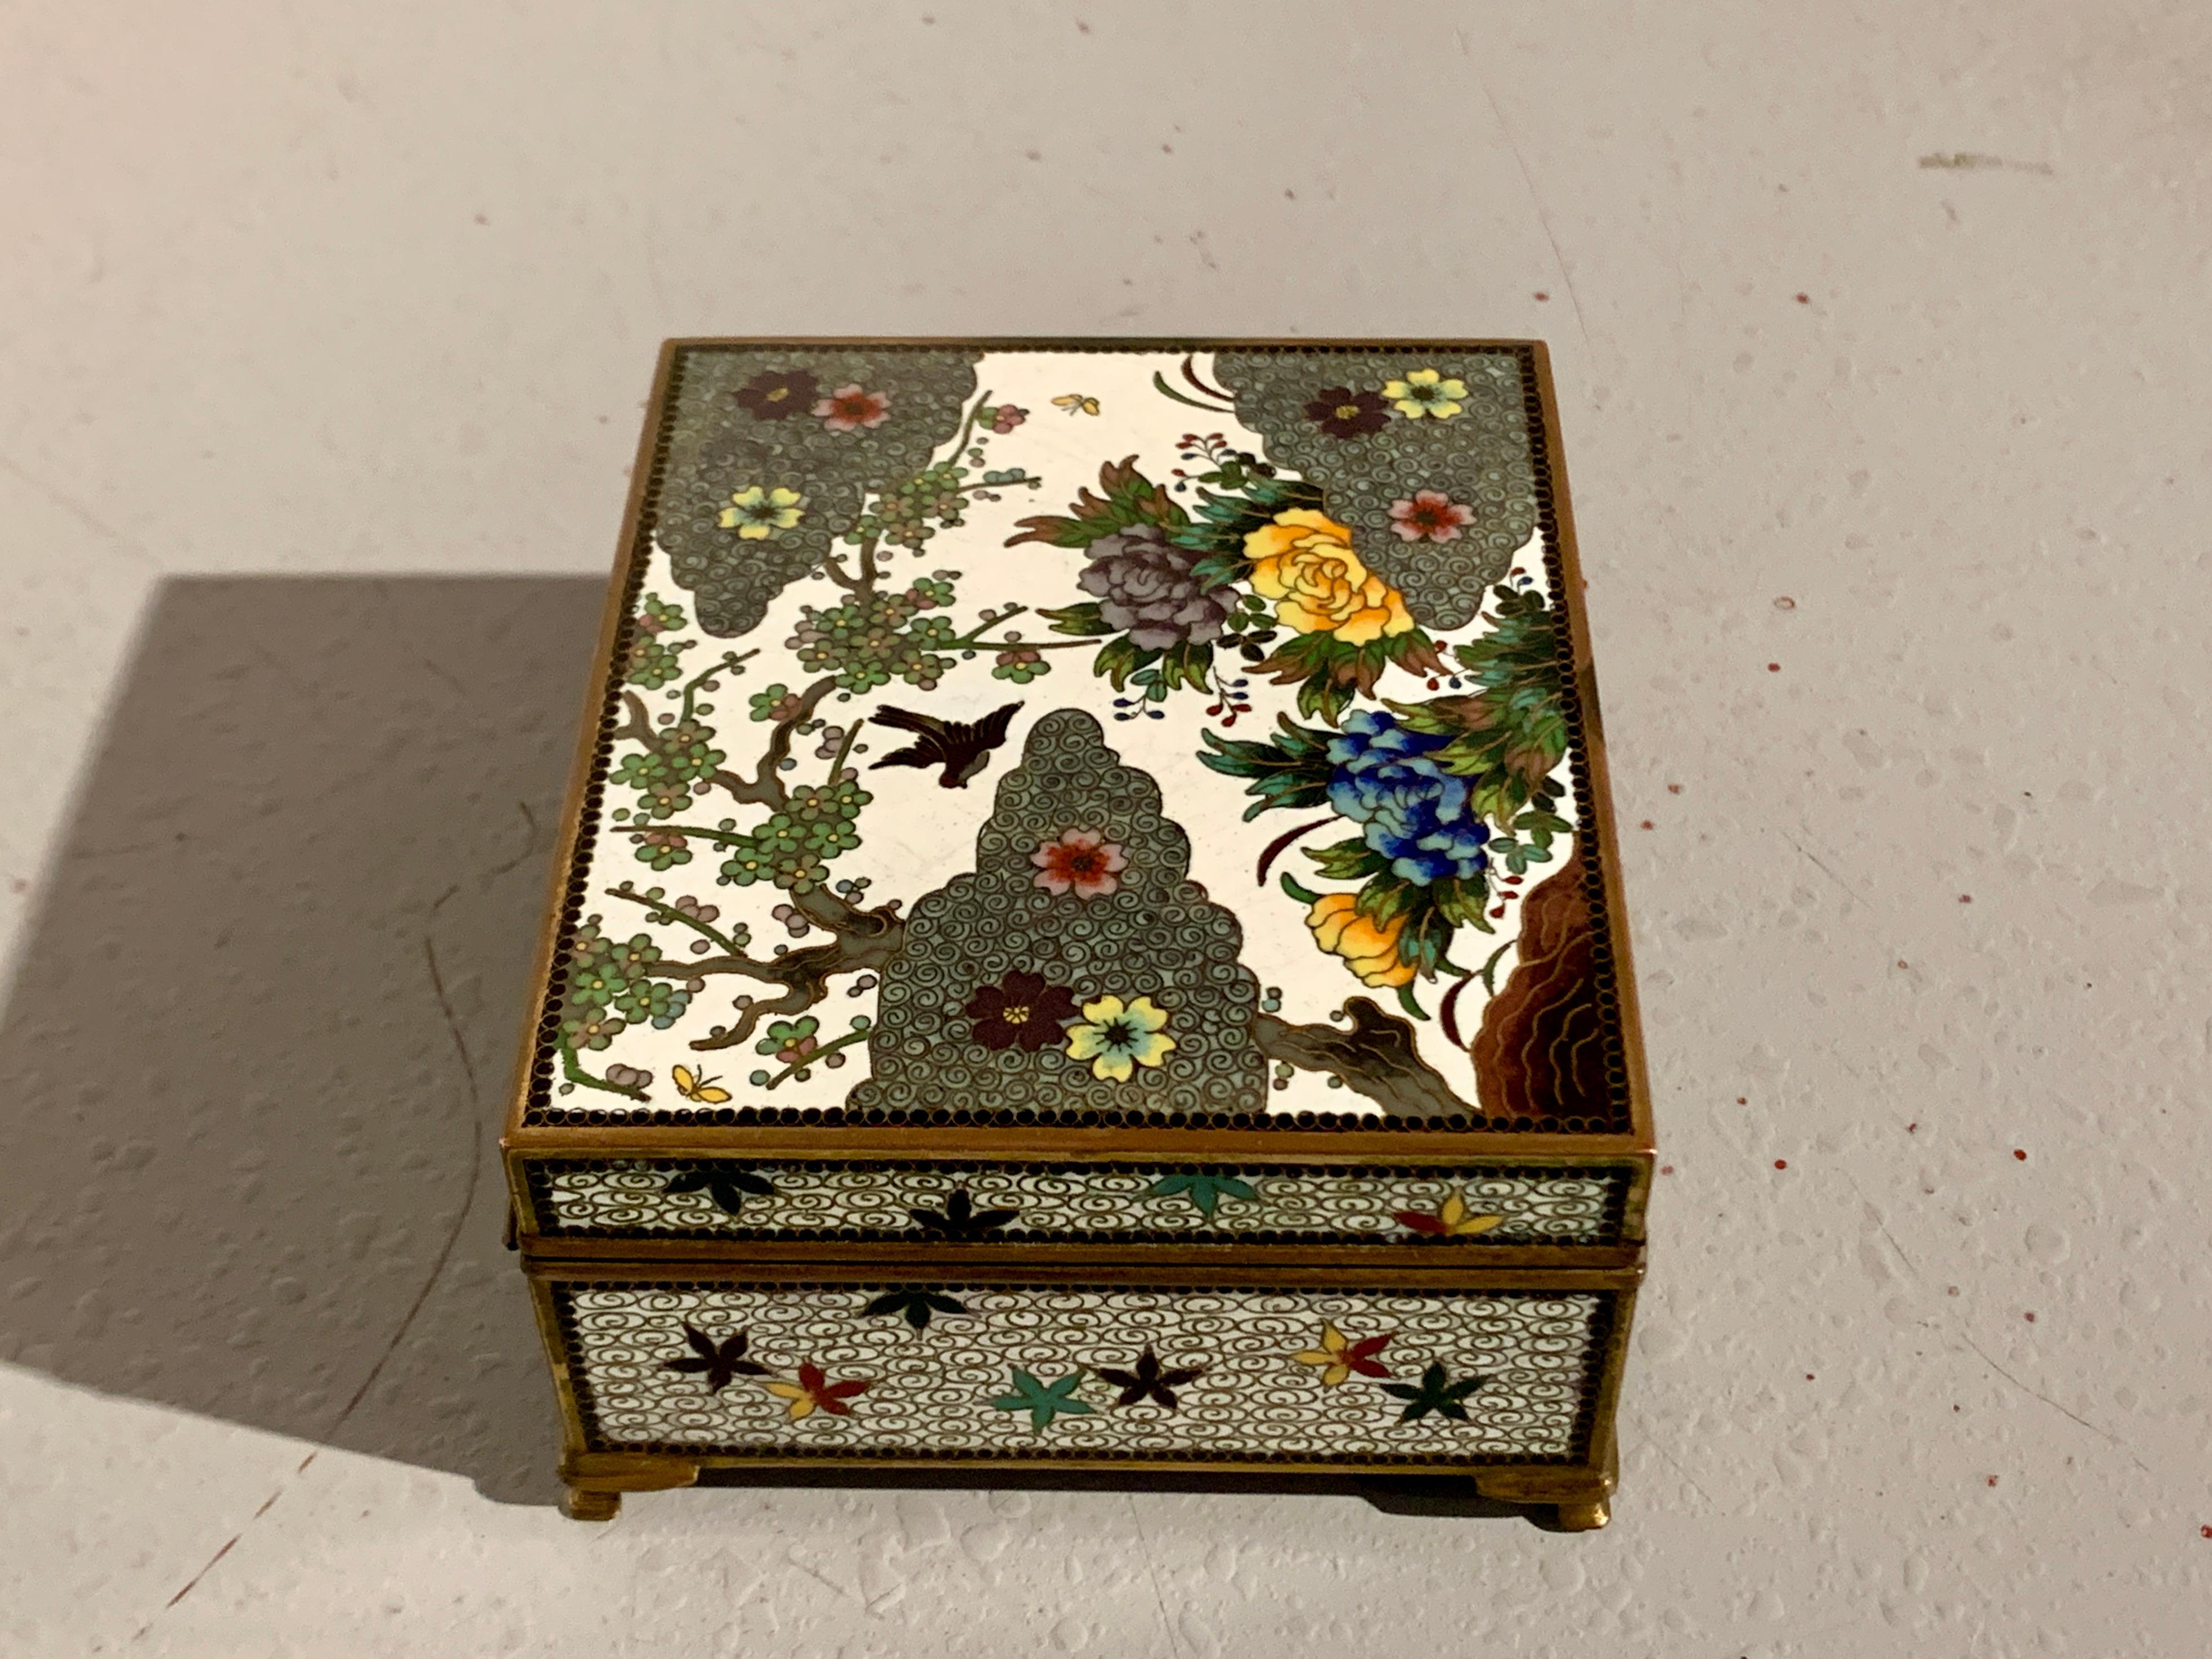 An attractive and well decorated Japanese white cloisonne hinged top box, Meiji period, circa 1910, Japan.

The small trinket or jewelry box sits on four short bracket feet. The top of the box features a pictorial scene, in a myriad of colored